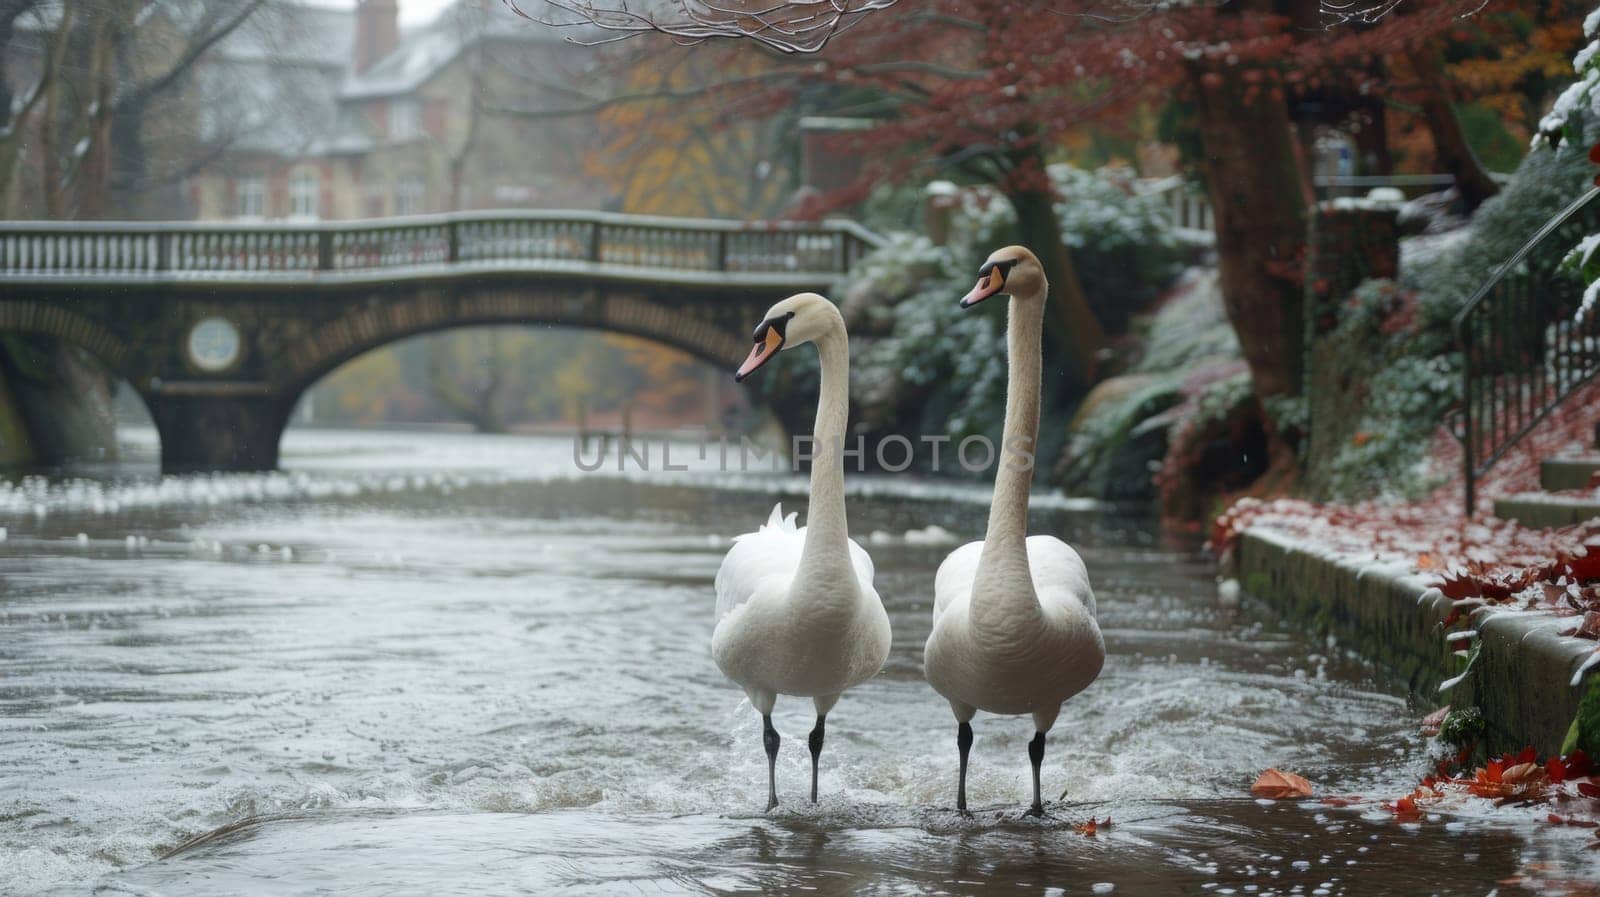 Two swans walking in a river near an overpass with water flowing under it